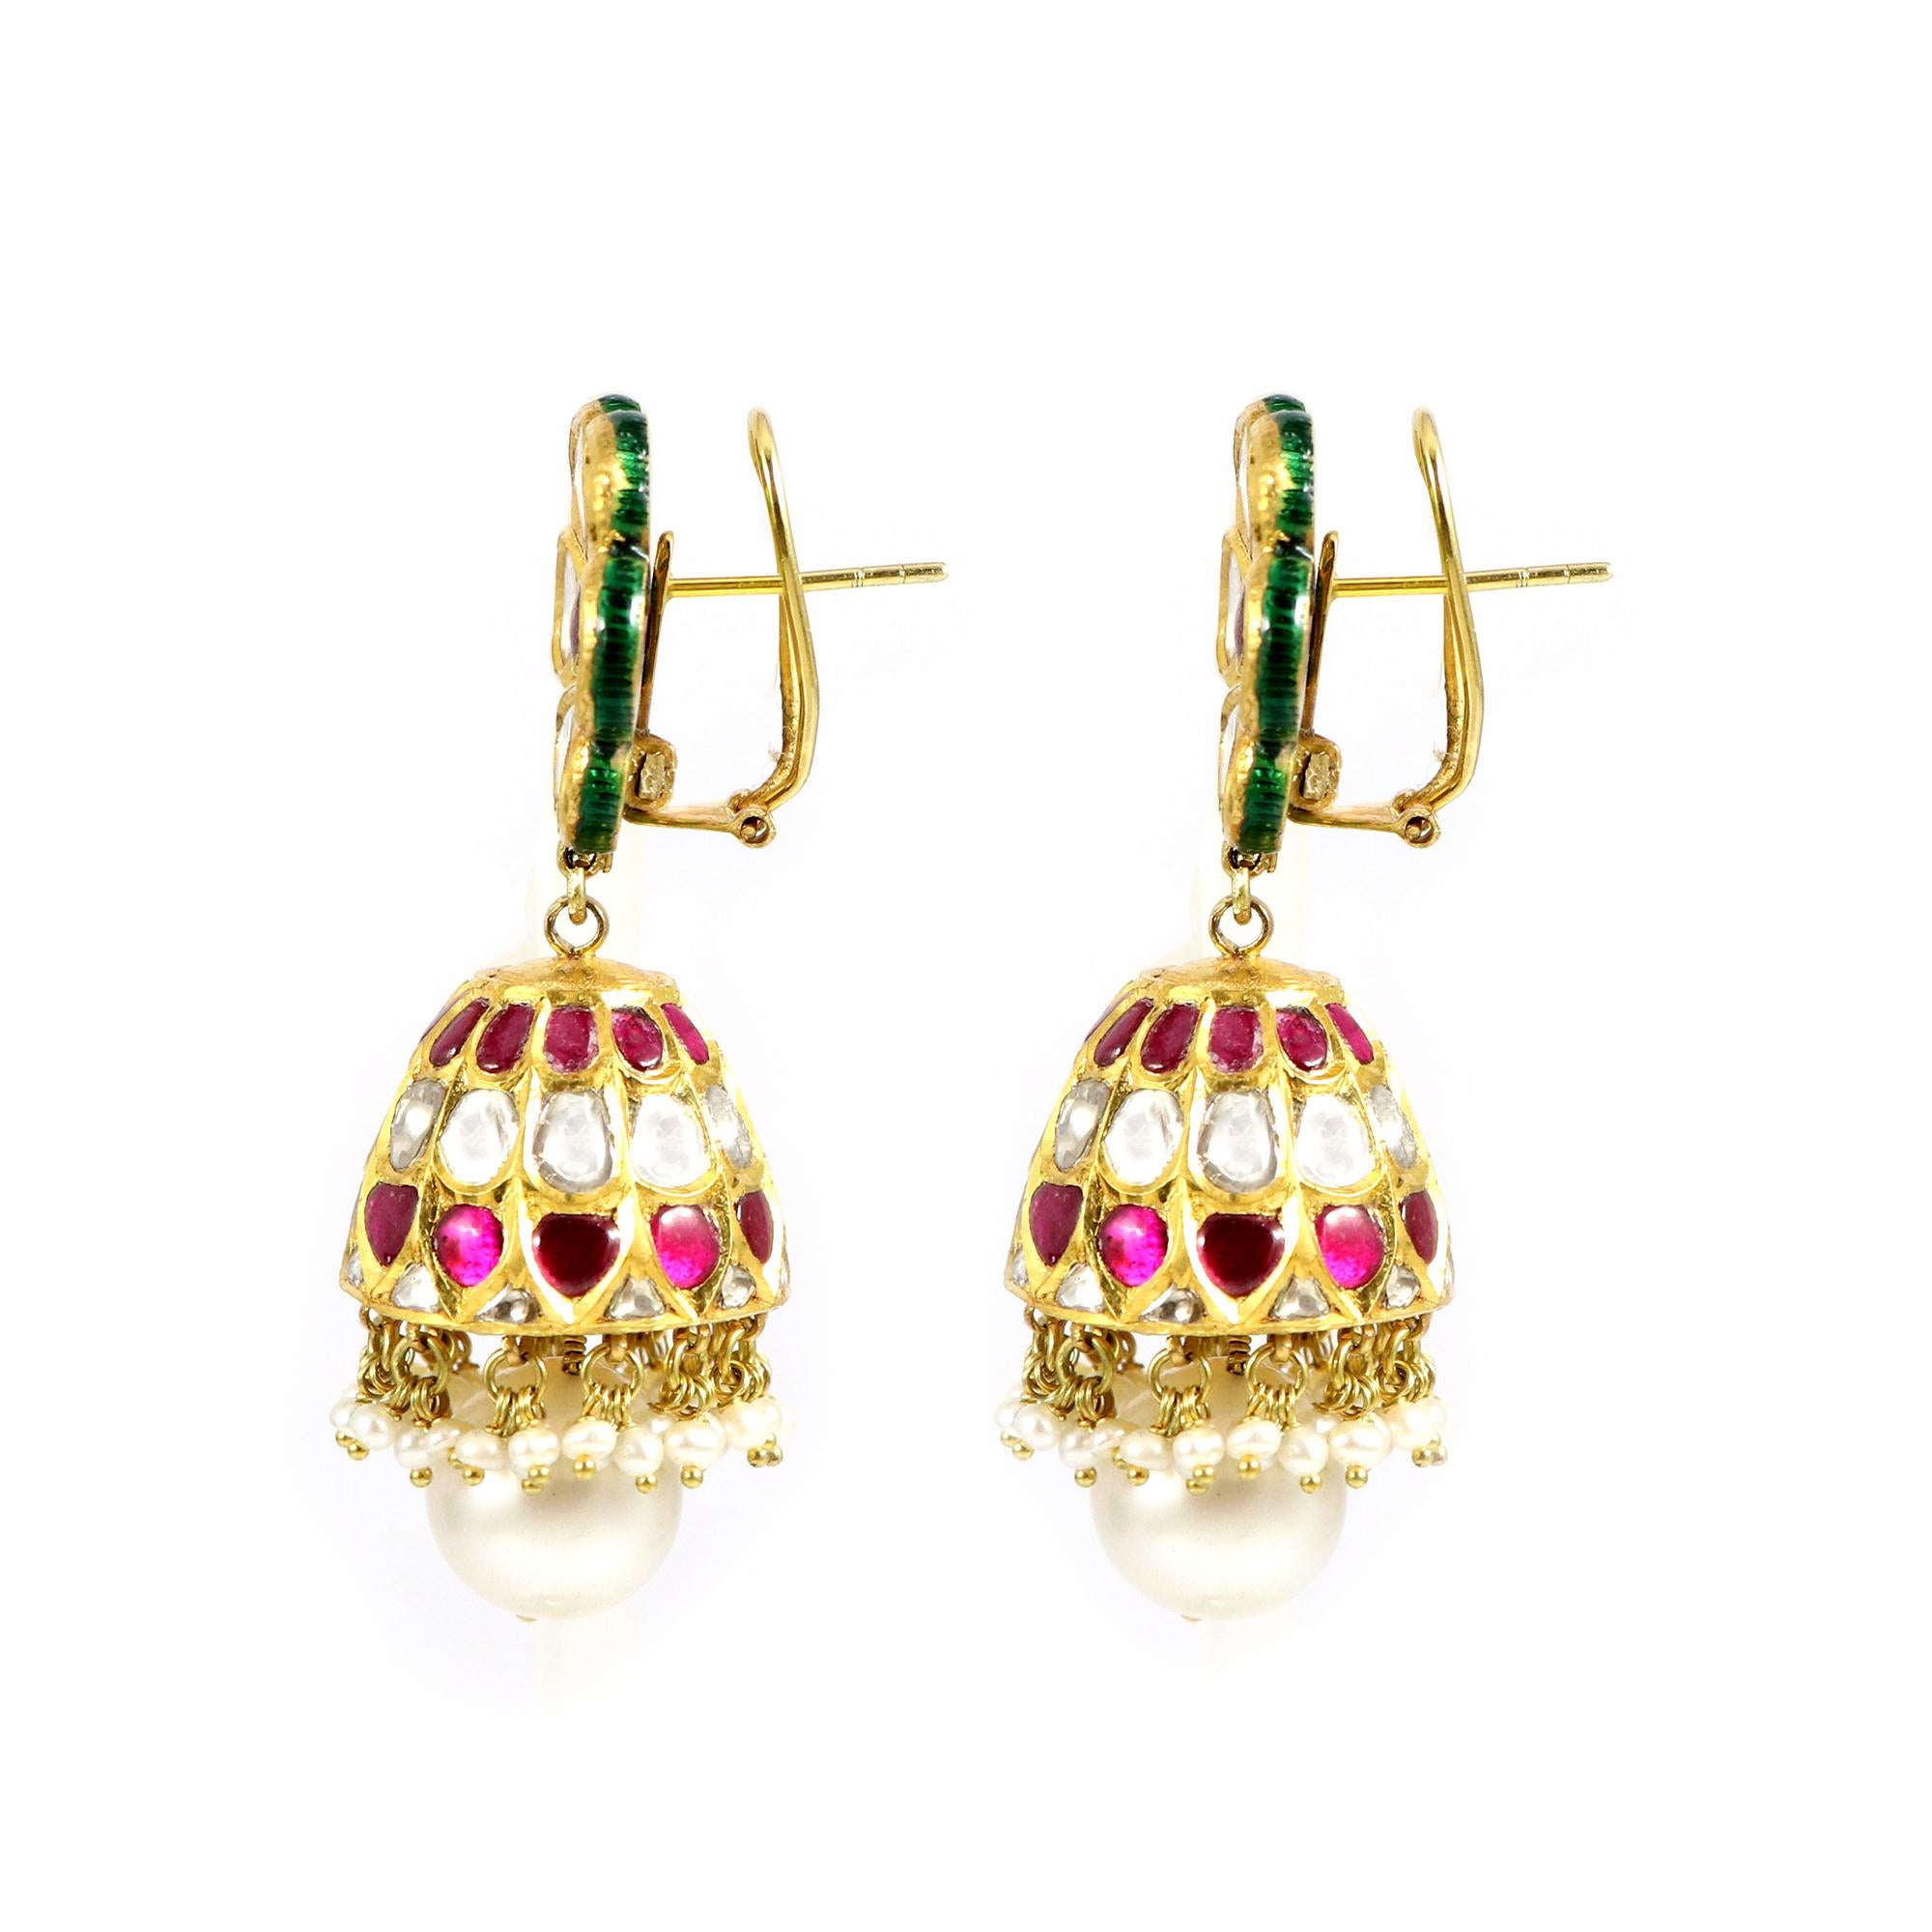 Experience enduring elegance with our flower-shaped Ruby and Polki Jhumki earrings. These stunning pieces of jewelry are crafted with precision and feature vibrant rubies and sparkling polki stones arranged in a captivating floral design and